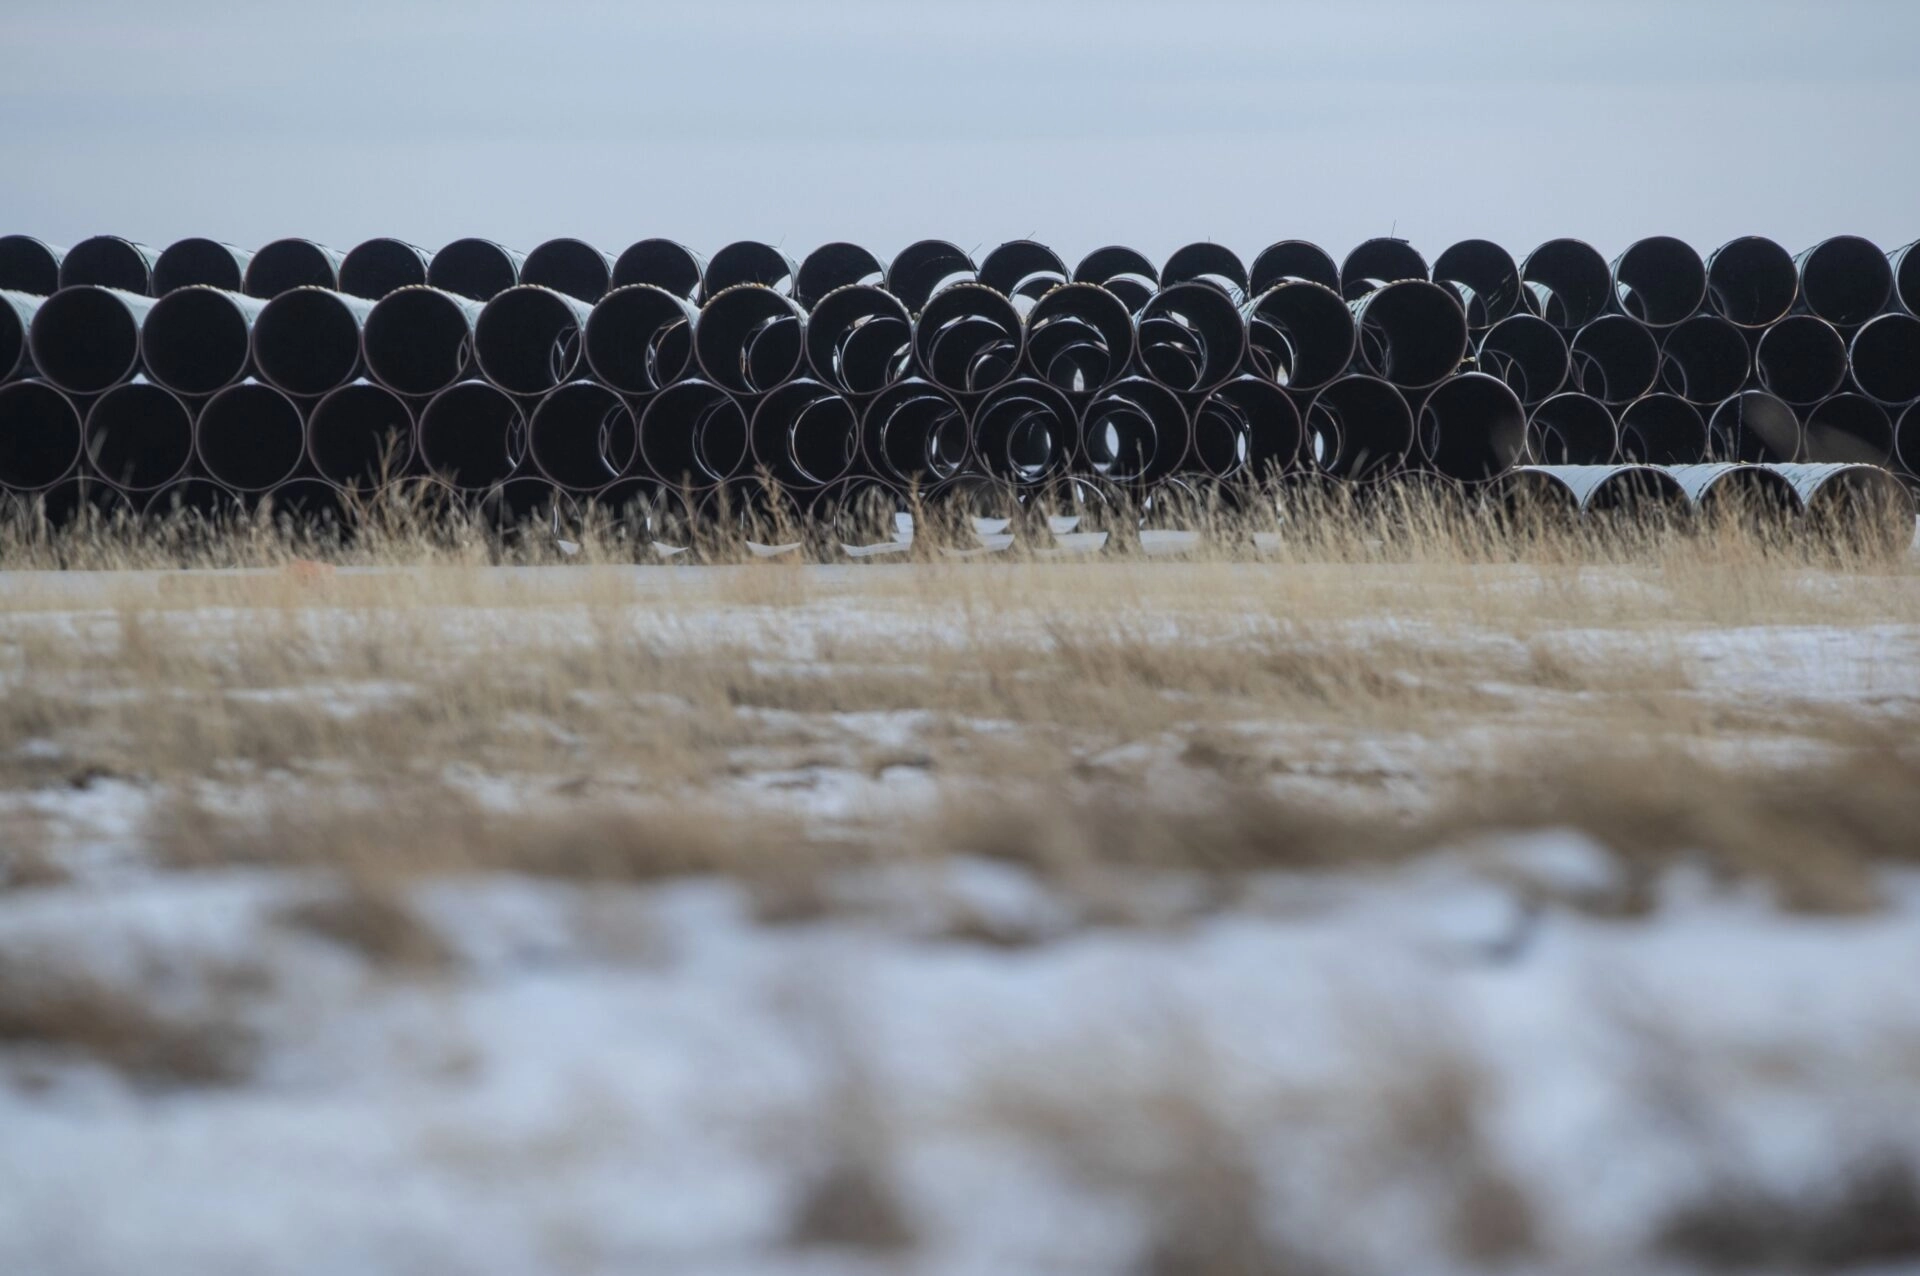 Keystone Pipeline Leak Consequences Spill Over into Gas Prices, National Economies